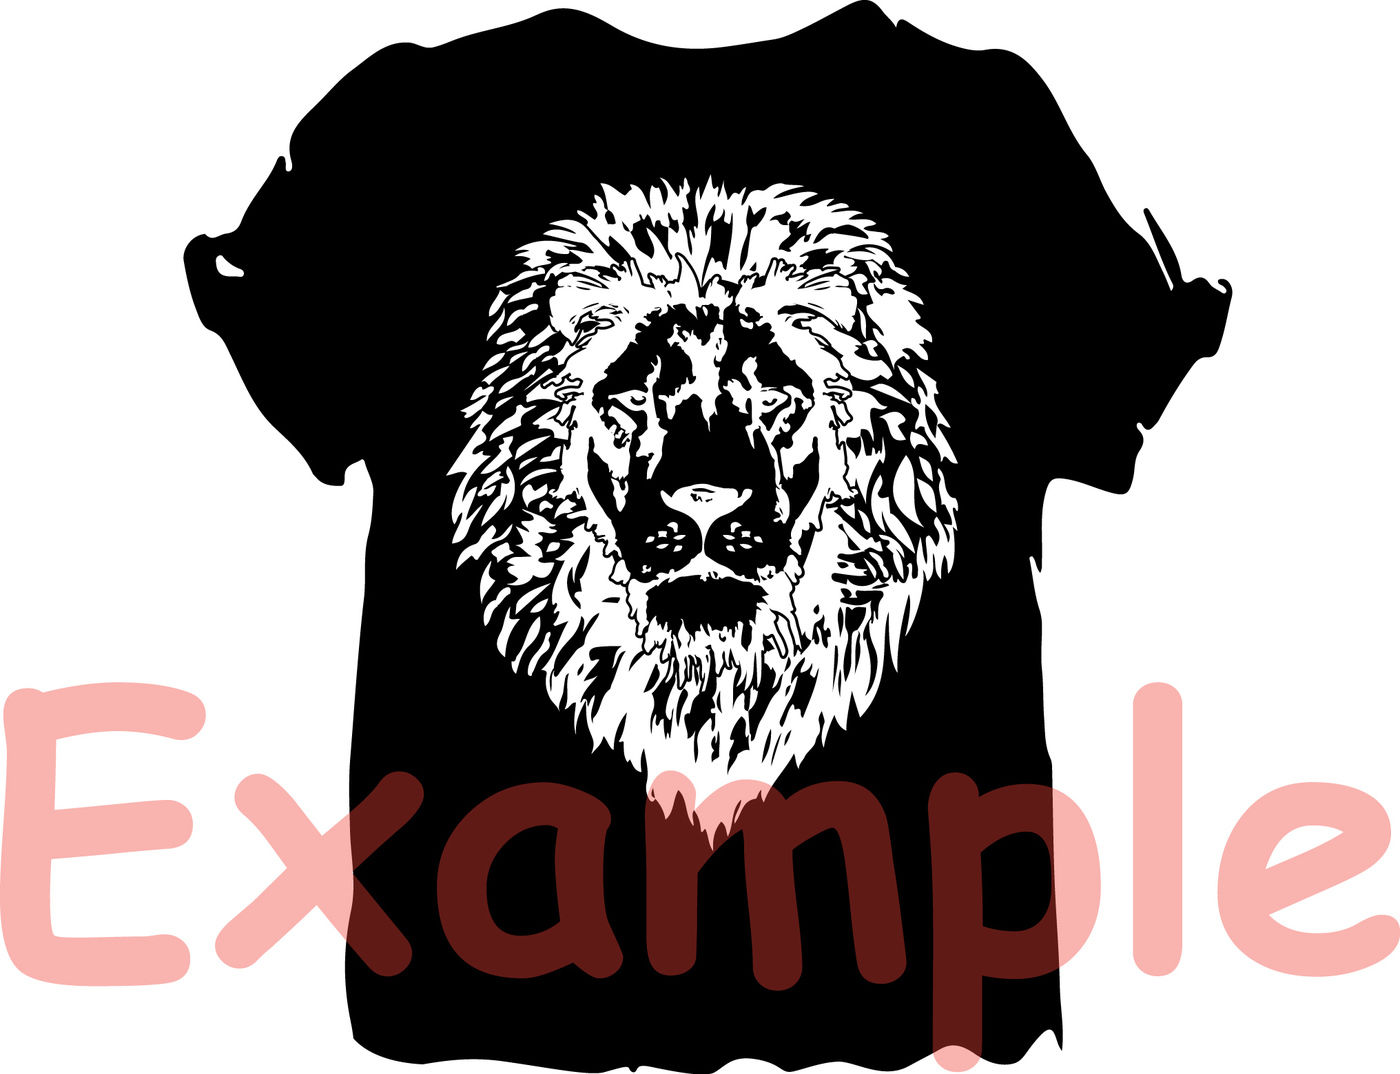 Download Lion Head Silhouette SVG wild animal african king claw zoo ...